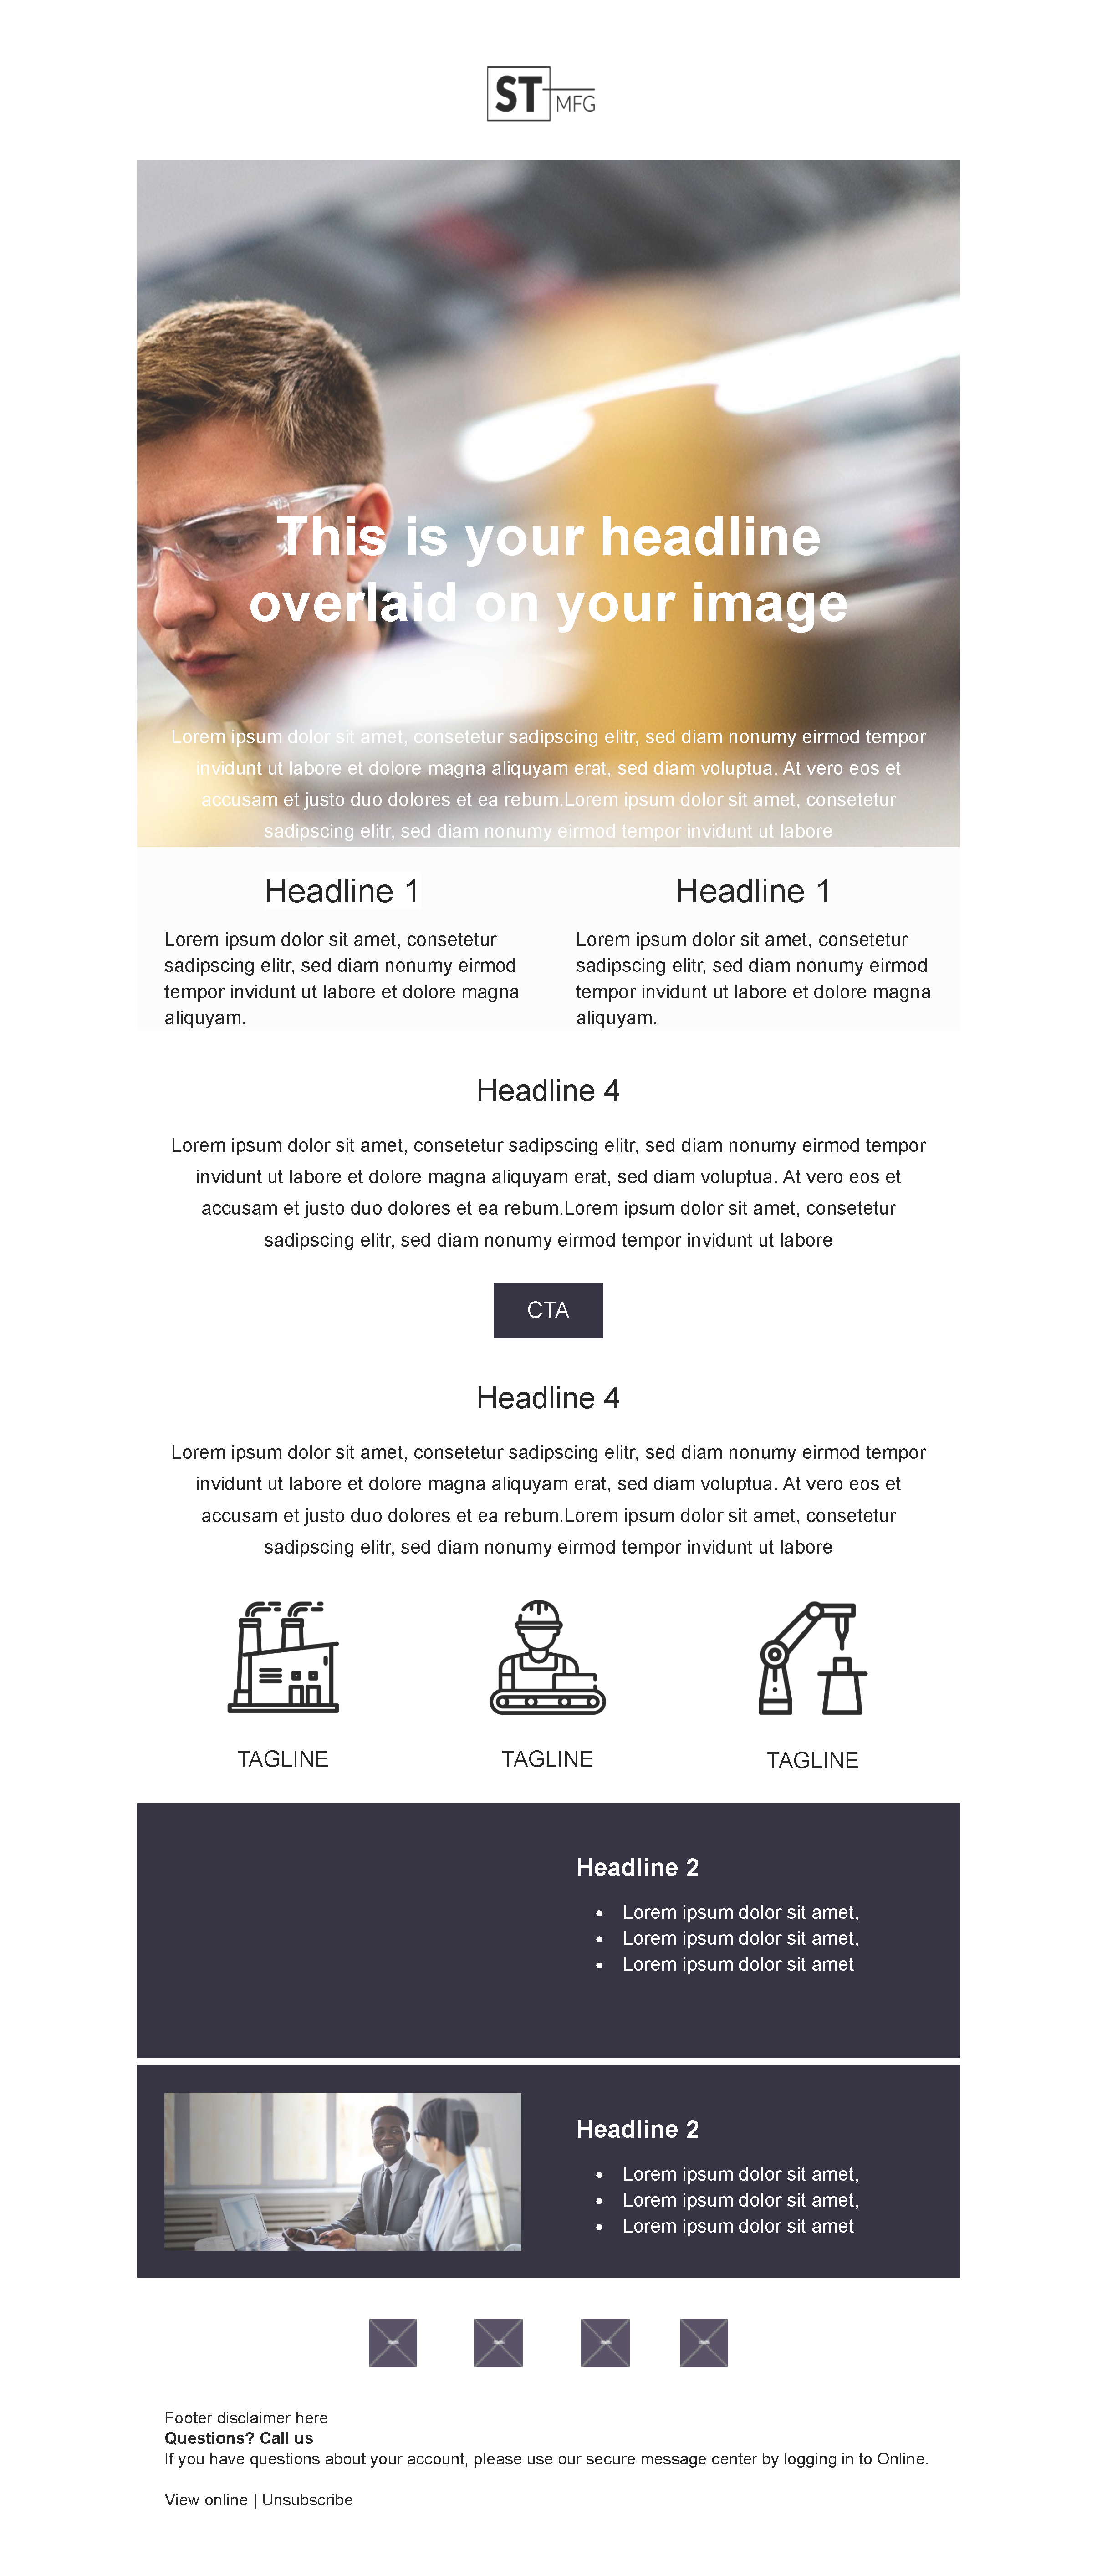 Newsletter email template 3 for Manufacturing companies